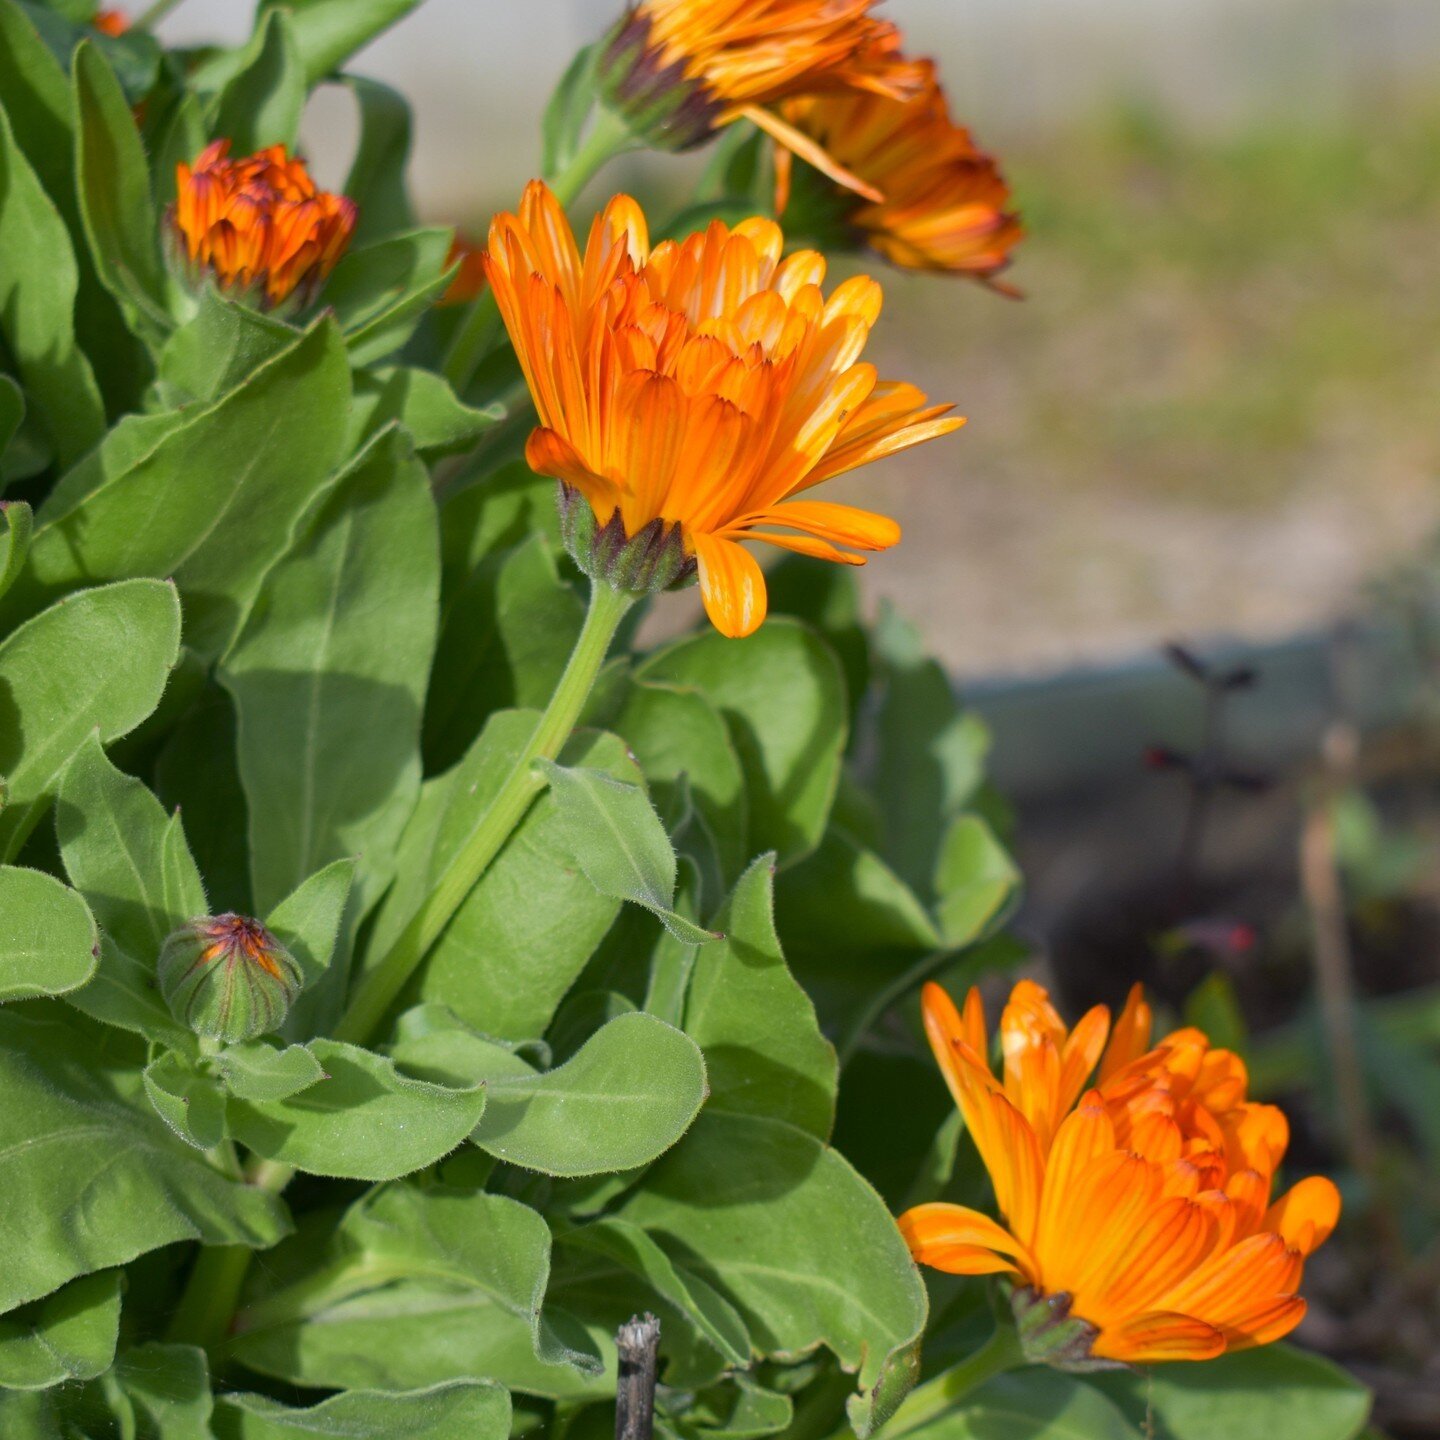 Bursts of Sunshine in the Garden! 🌼 Our calendulas are blooming beautifully, adding some vibrant colors to the Ambitious Harvest gardens.

#CalendulaBeauty #GardenVibrance #CompanionPlanting #AmbitiousHarvest